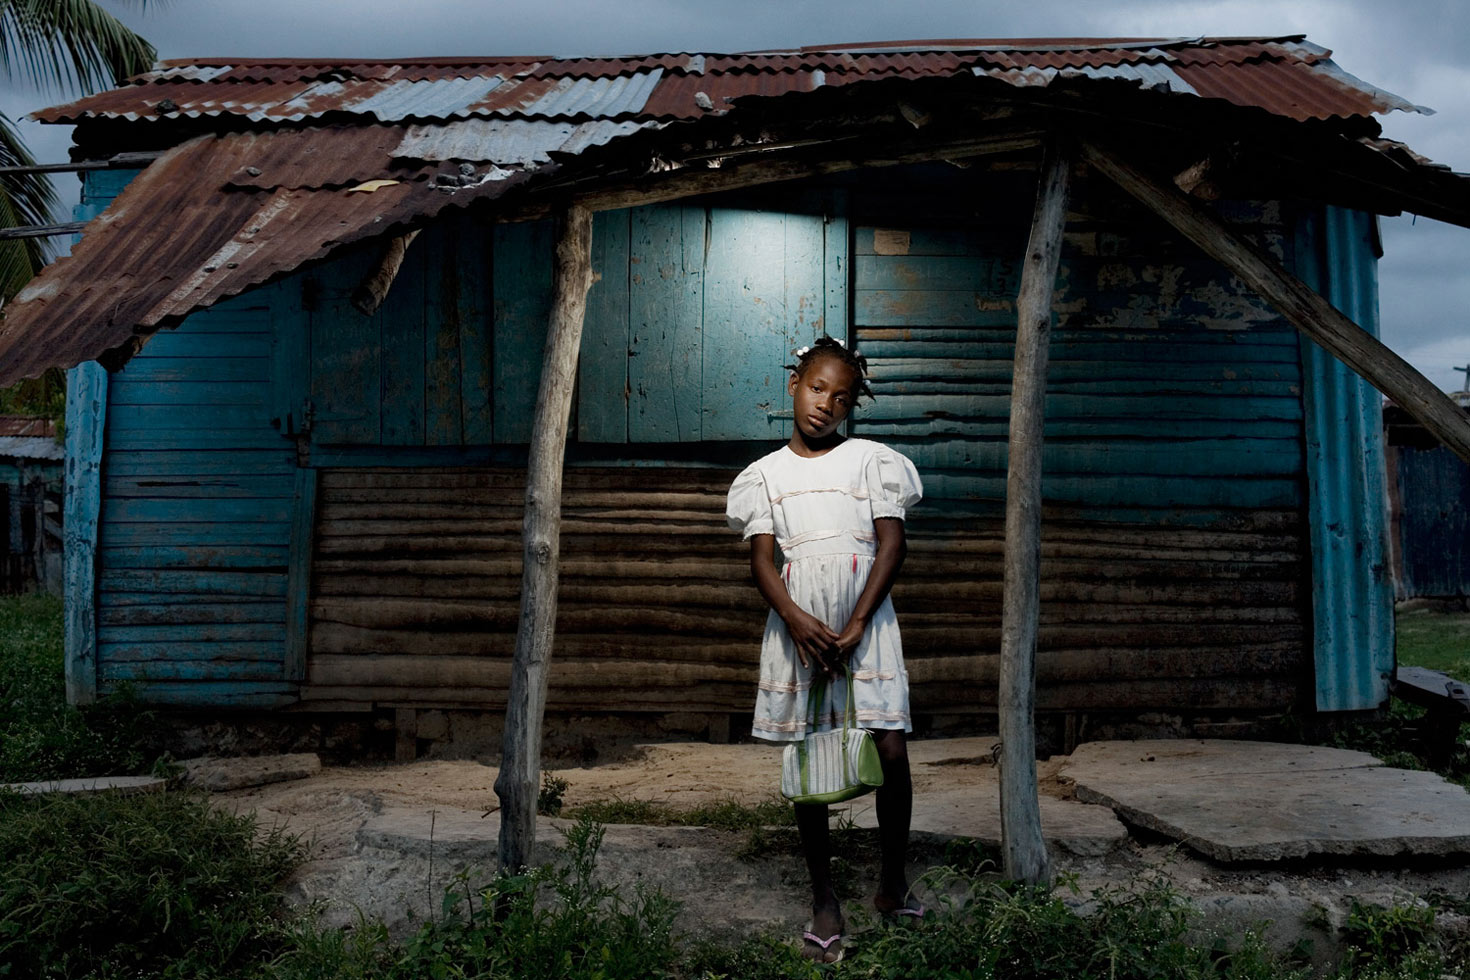 Gris, 9, is one of the many children in Las Pajas without a birth certificate. Her mother was born in Haiti, and although Gris was born in the Dominican Republic, she is not considered a legal citizen. Gris cannot go to school past the 8th grade without a Dominican birth certificate.